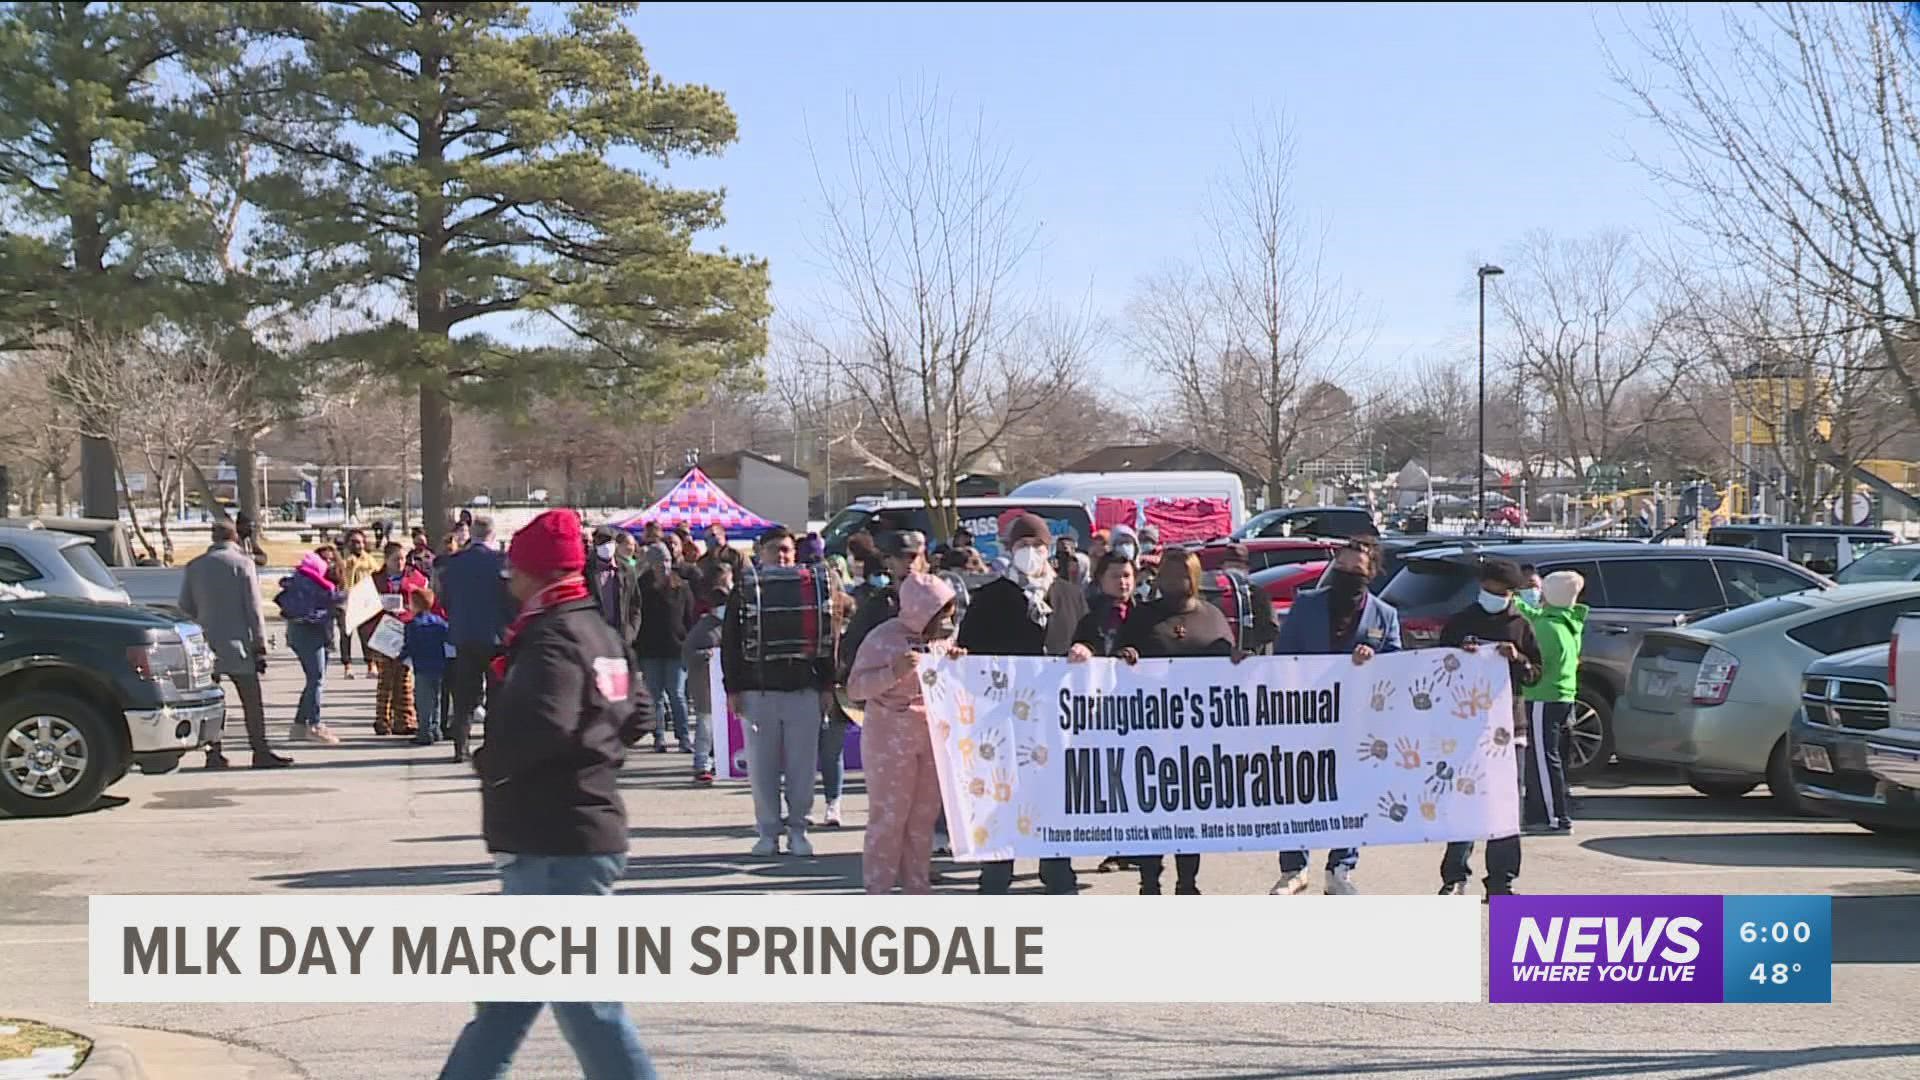 The event featured performances from local musicians, speeches from community members and awards recognizing service throughout the Springdale community.